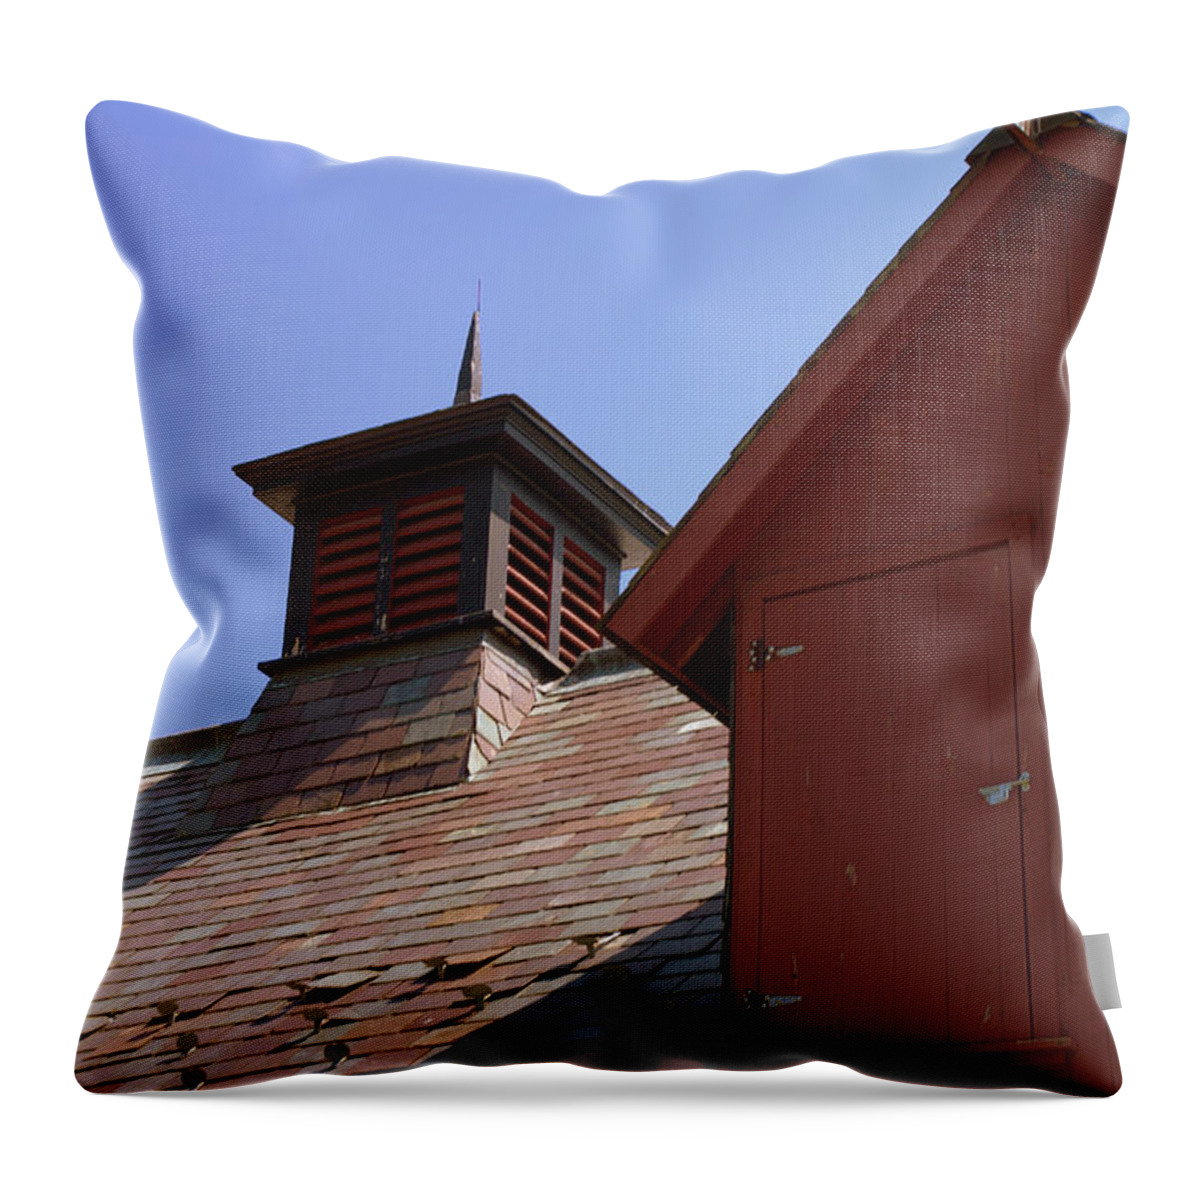 Barn Throw Pillow featuring the photograph Barn Roof by Judy Salcedo